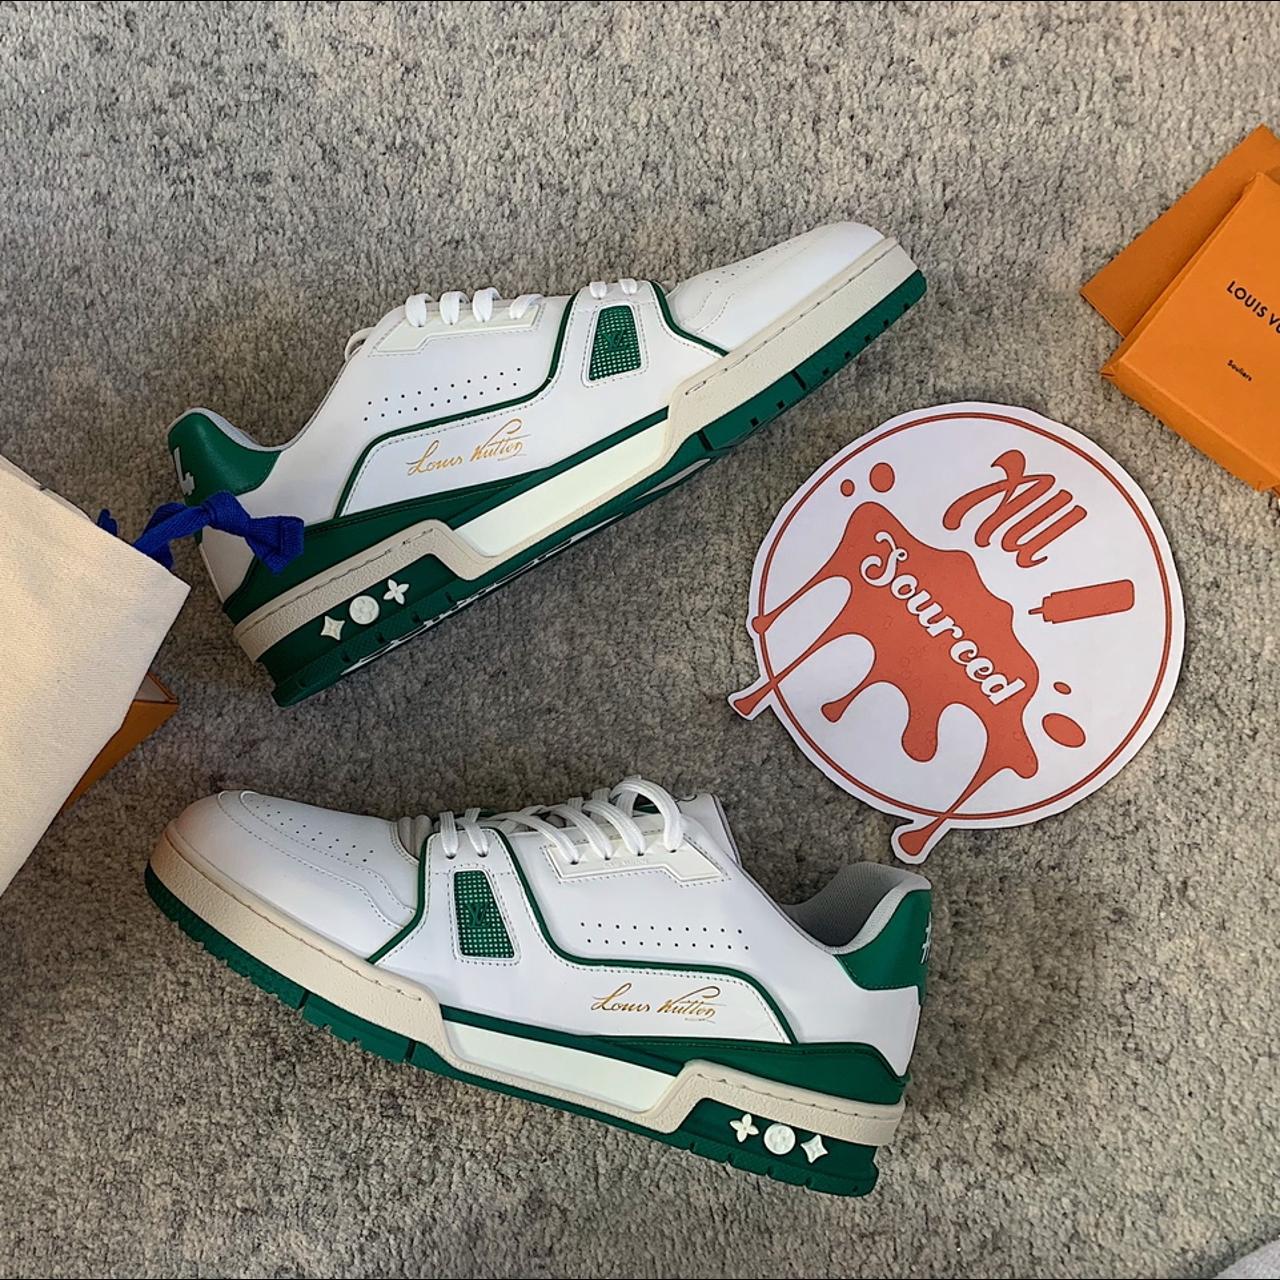 Louis Vuitton SS19 LV Trainer Green / White size LV 9 (UK 9)